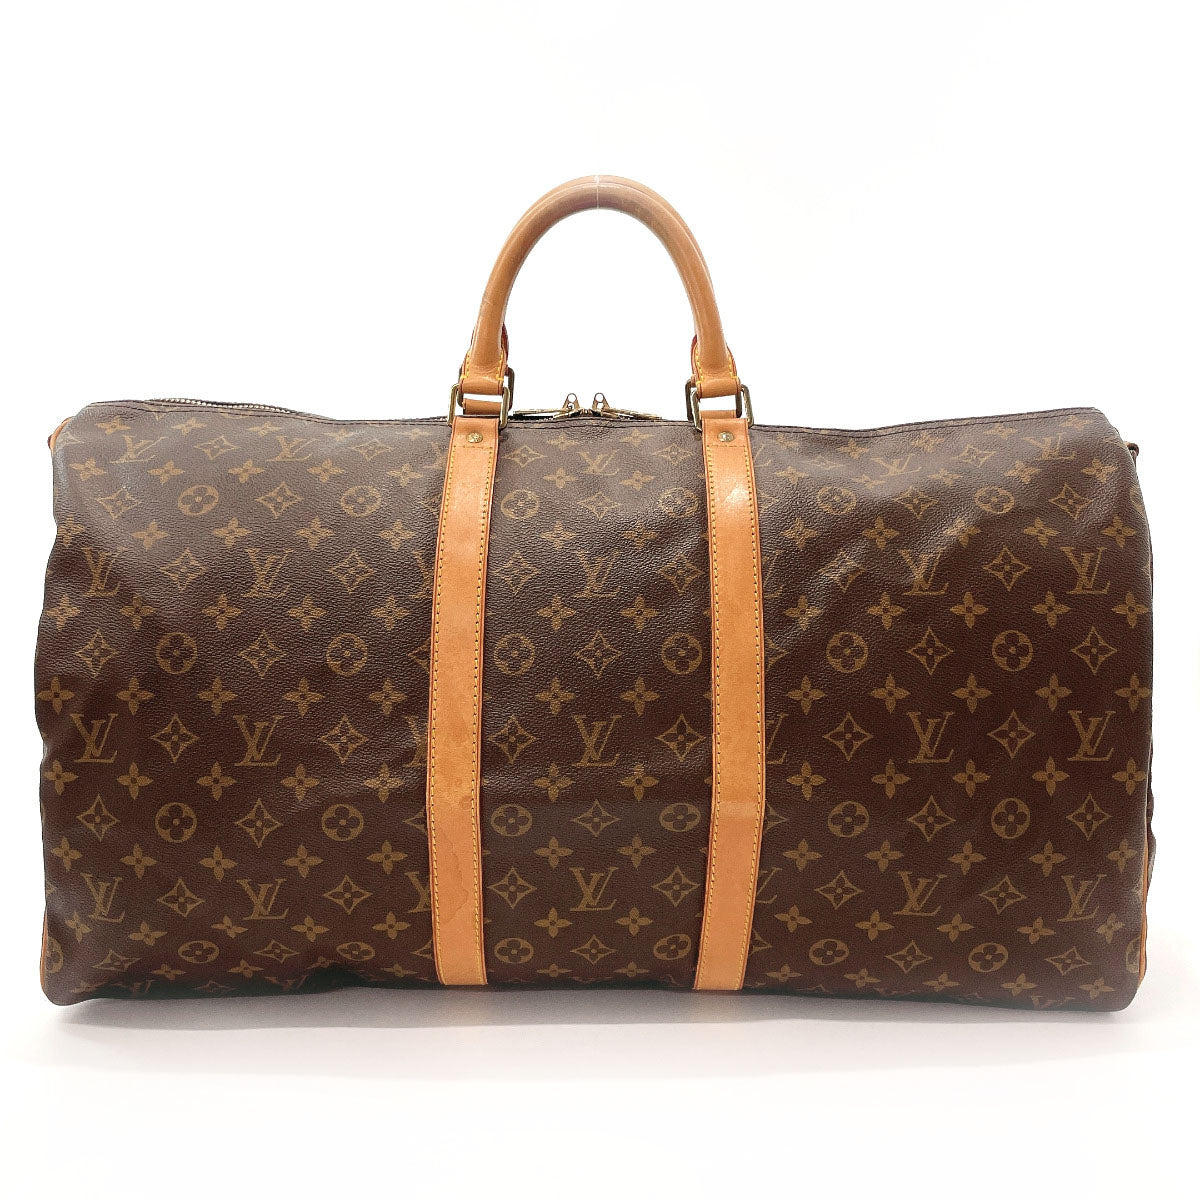 Louis Vuitton Keepall bandouliere 55 - Good or Bag